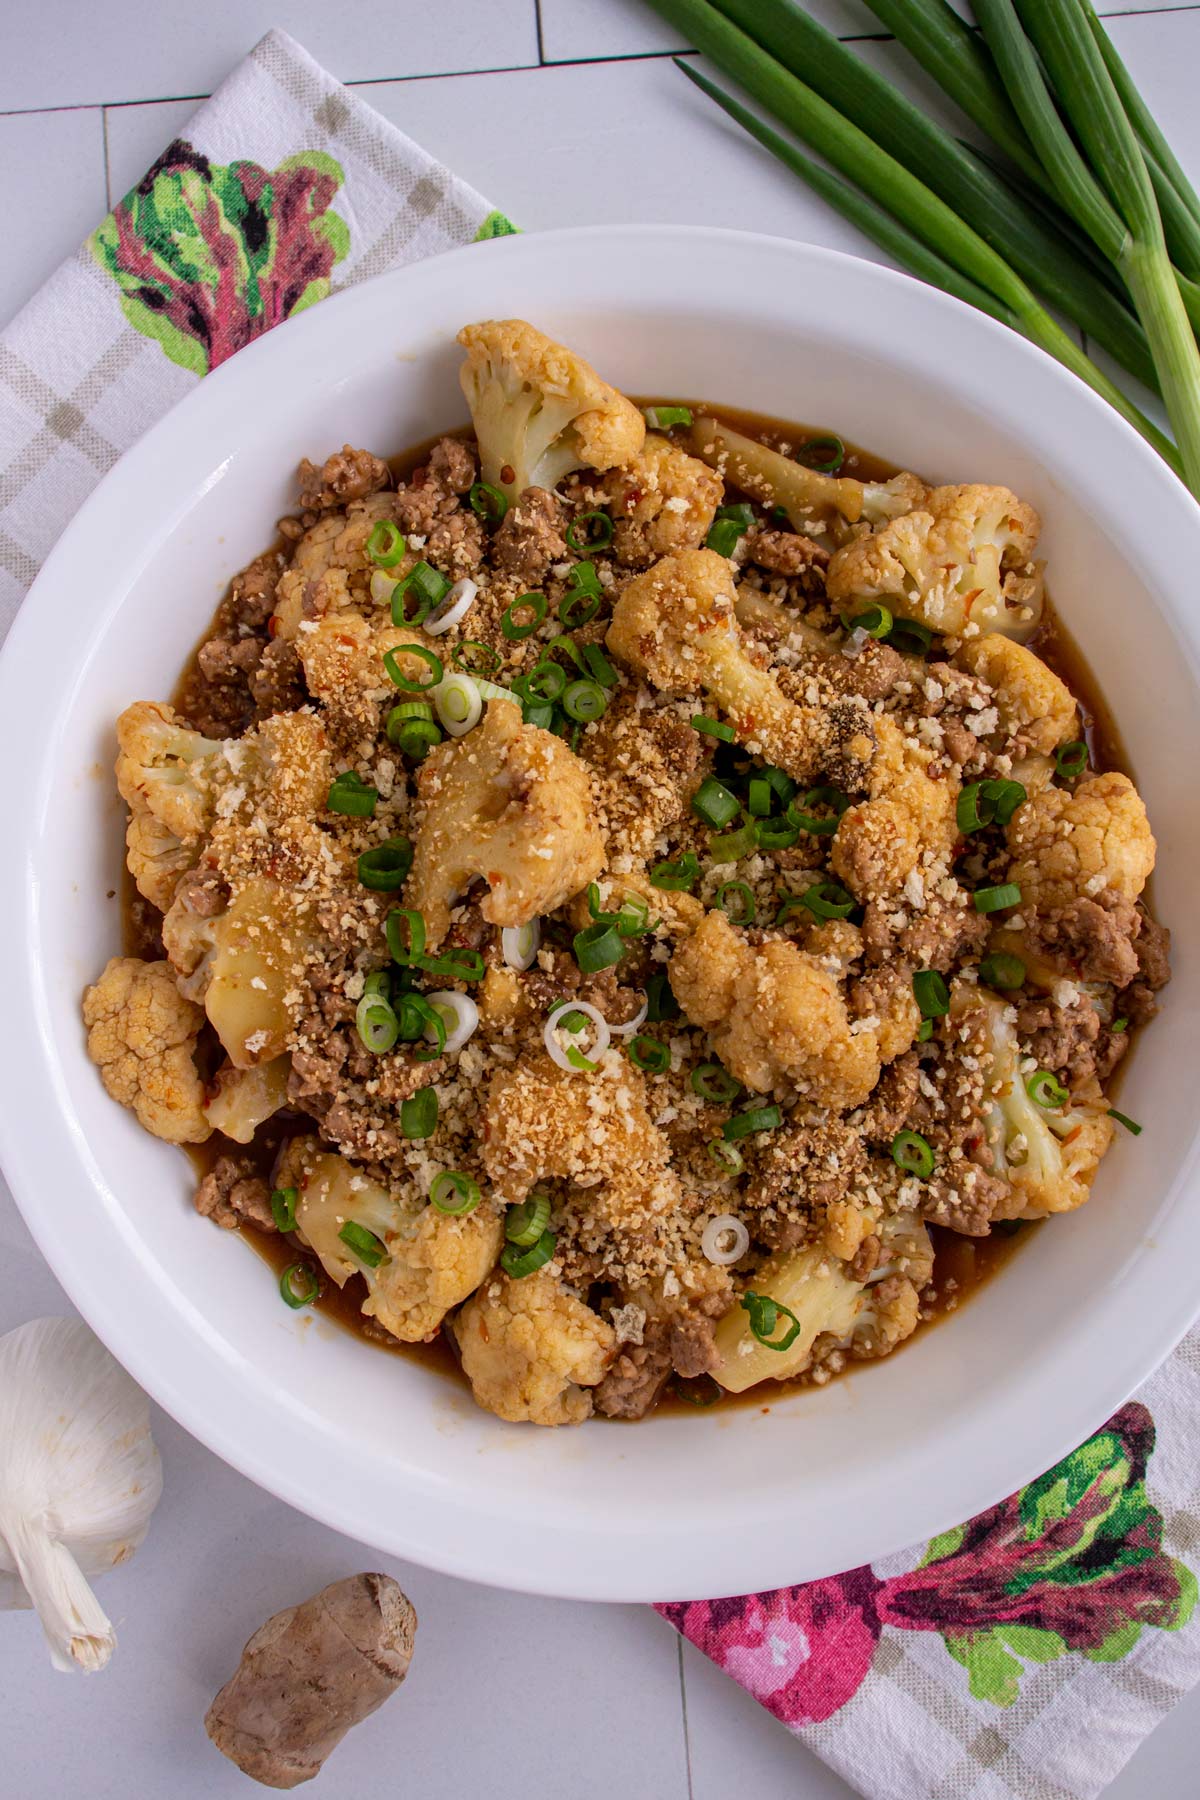 Stir-fried cauliflower with ground pork topped with panko and scallions in a wide white bowl.